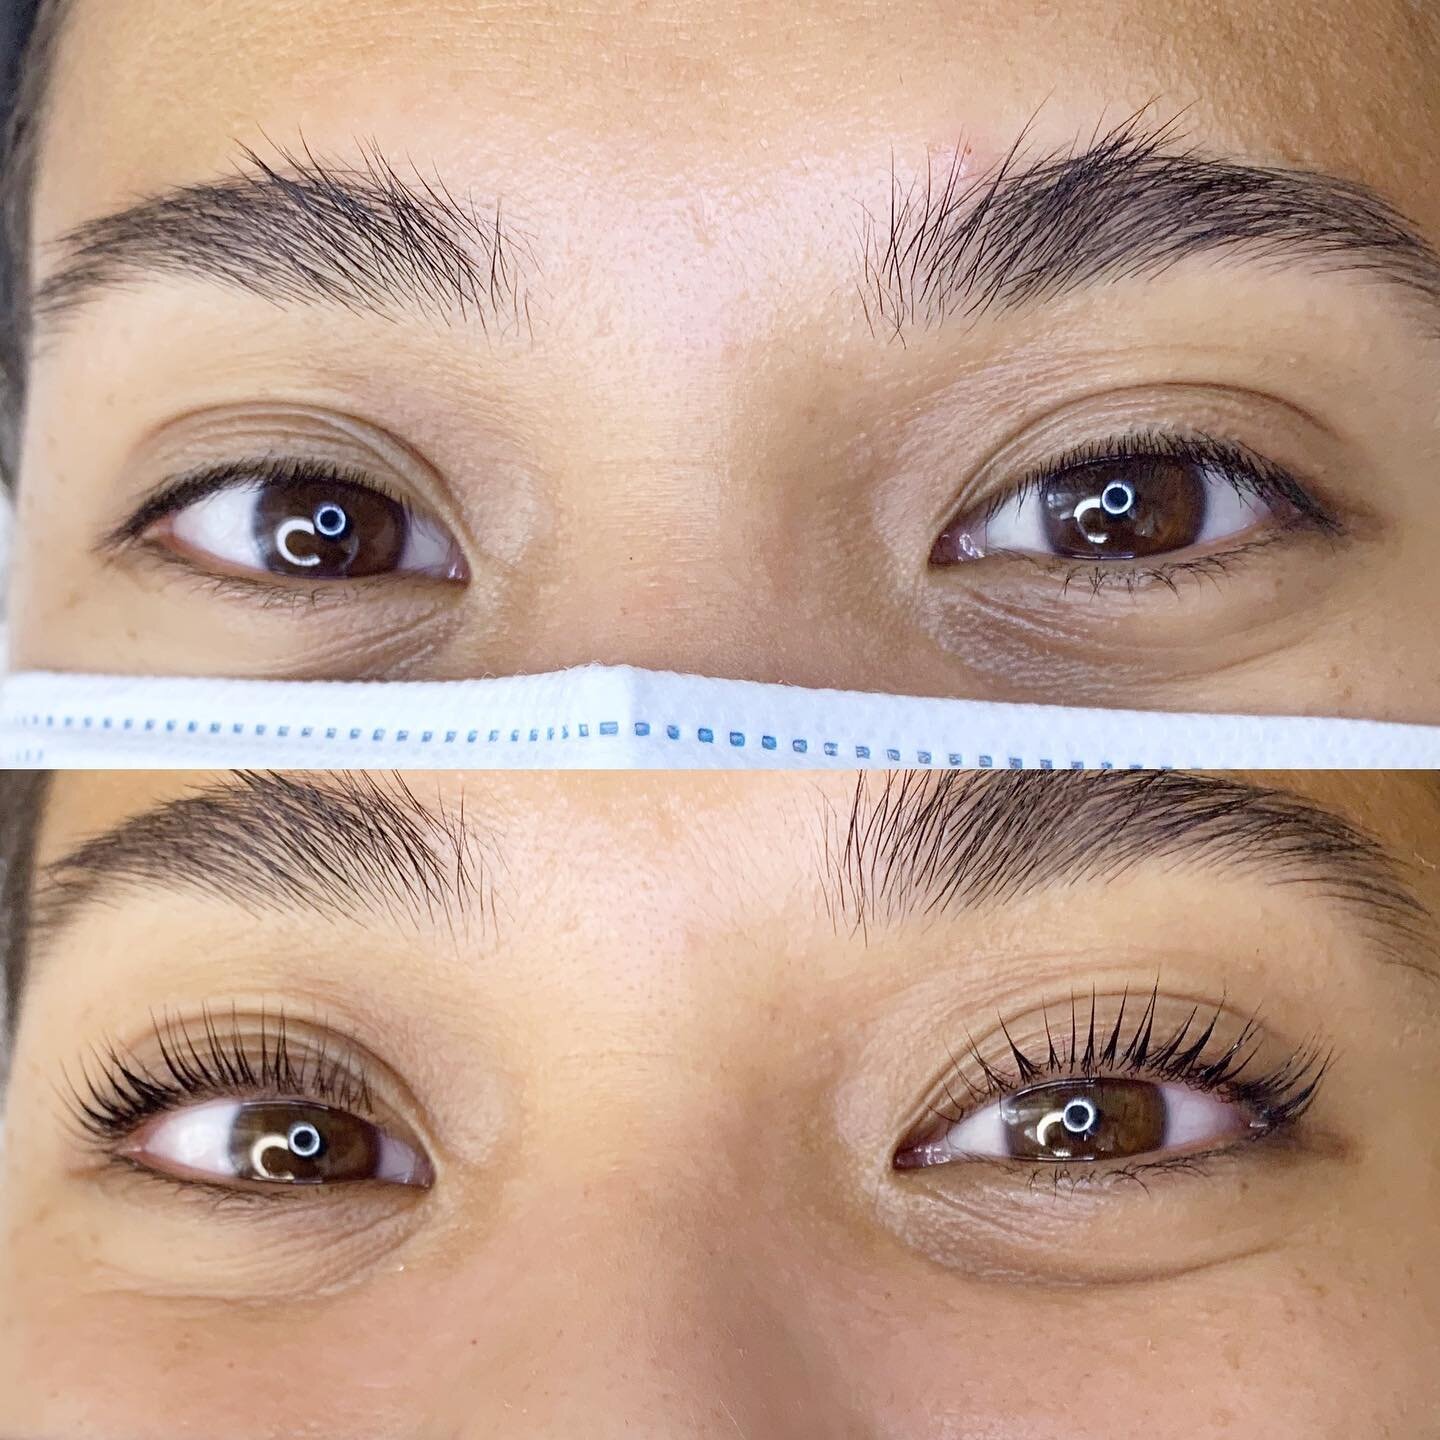 I absolutely loved this lash lift transformation and even more getting to chat and get to know Ms. M! 

Even when you think your lashes are too short, a lash lift enhance and extending their appearance, resulting in fuller and longer looking lashes. 